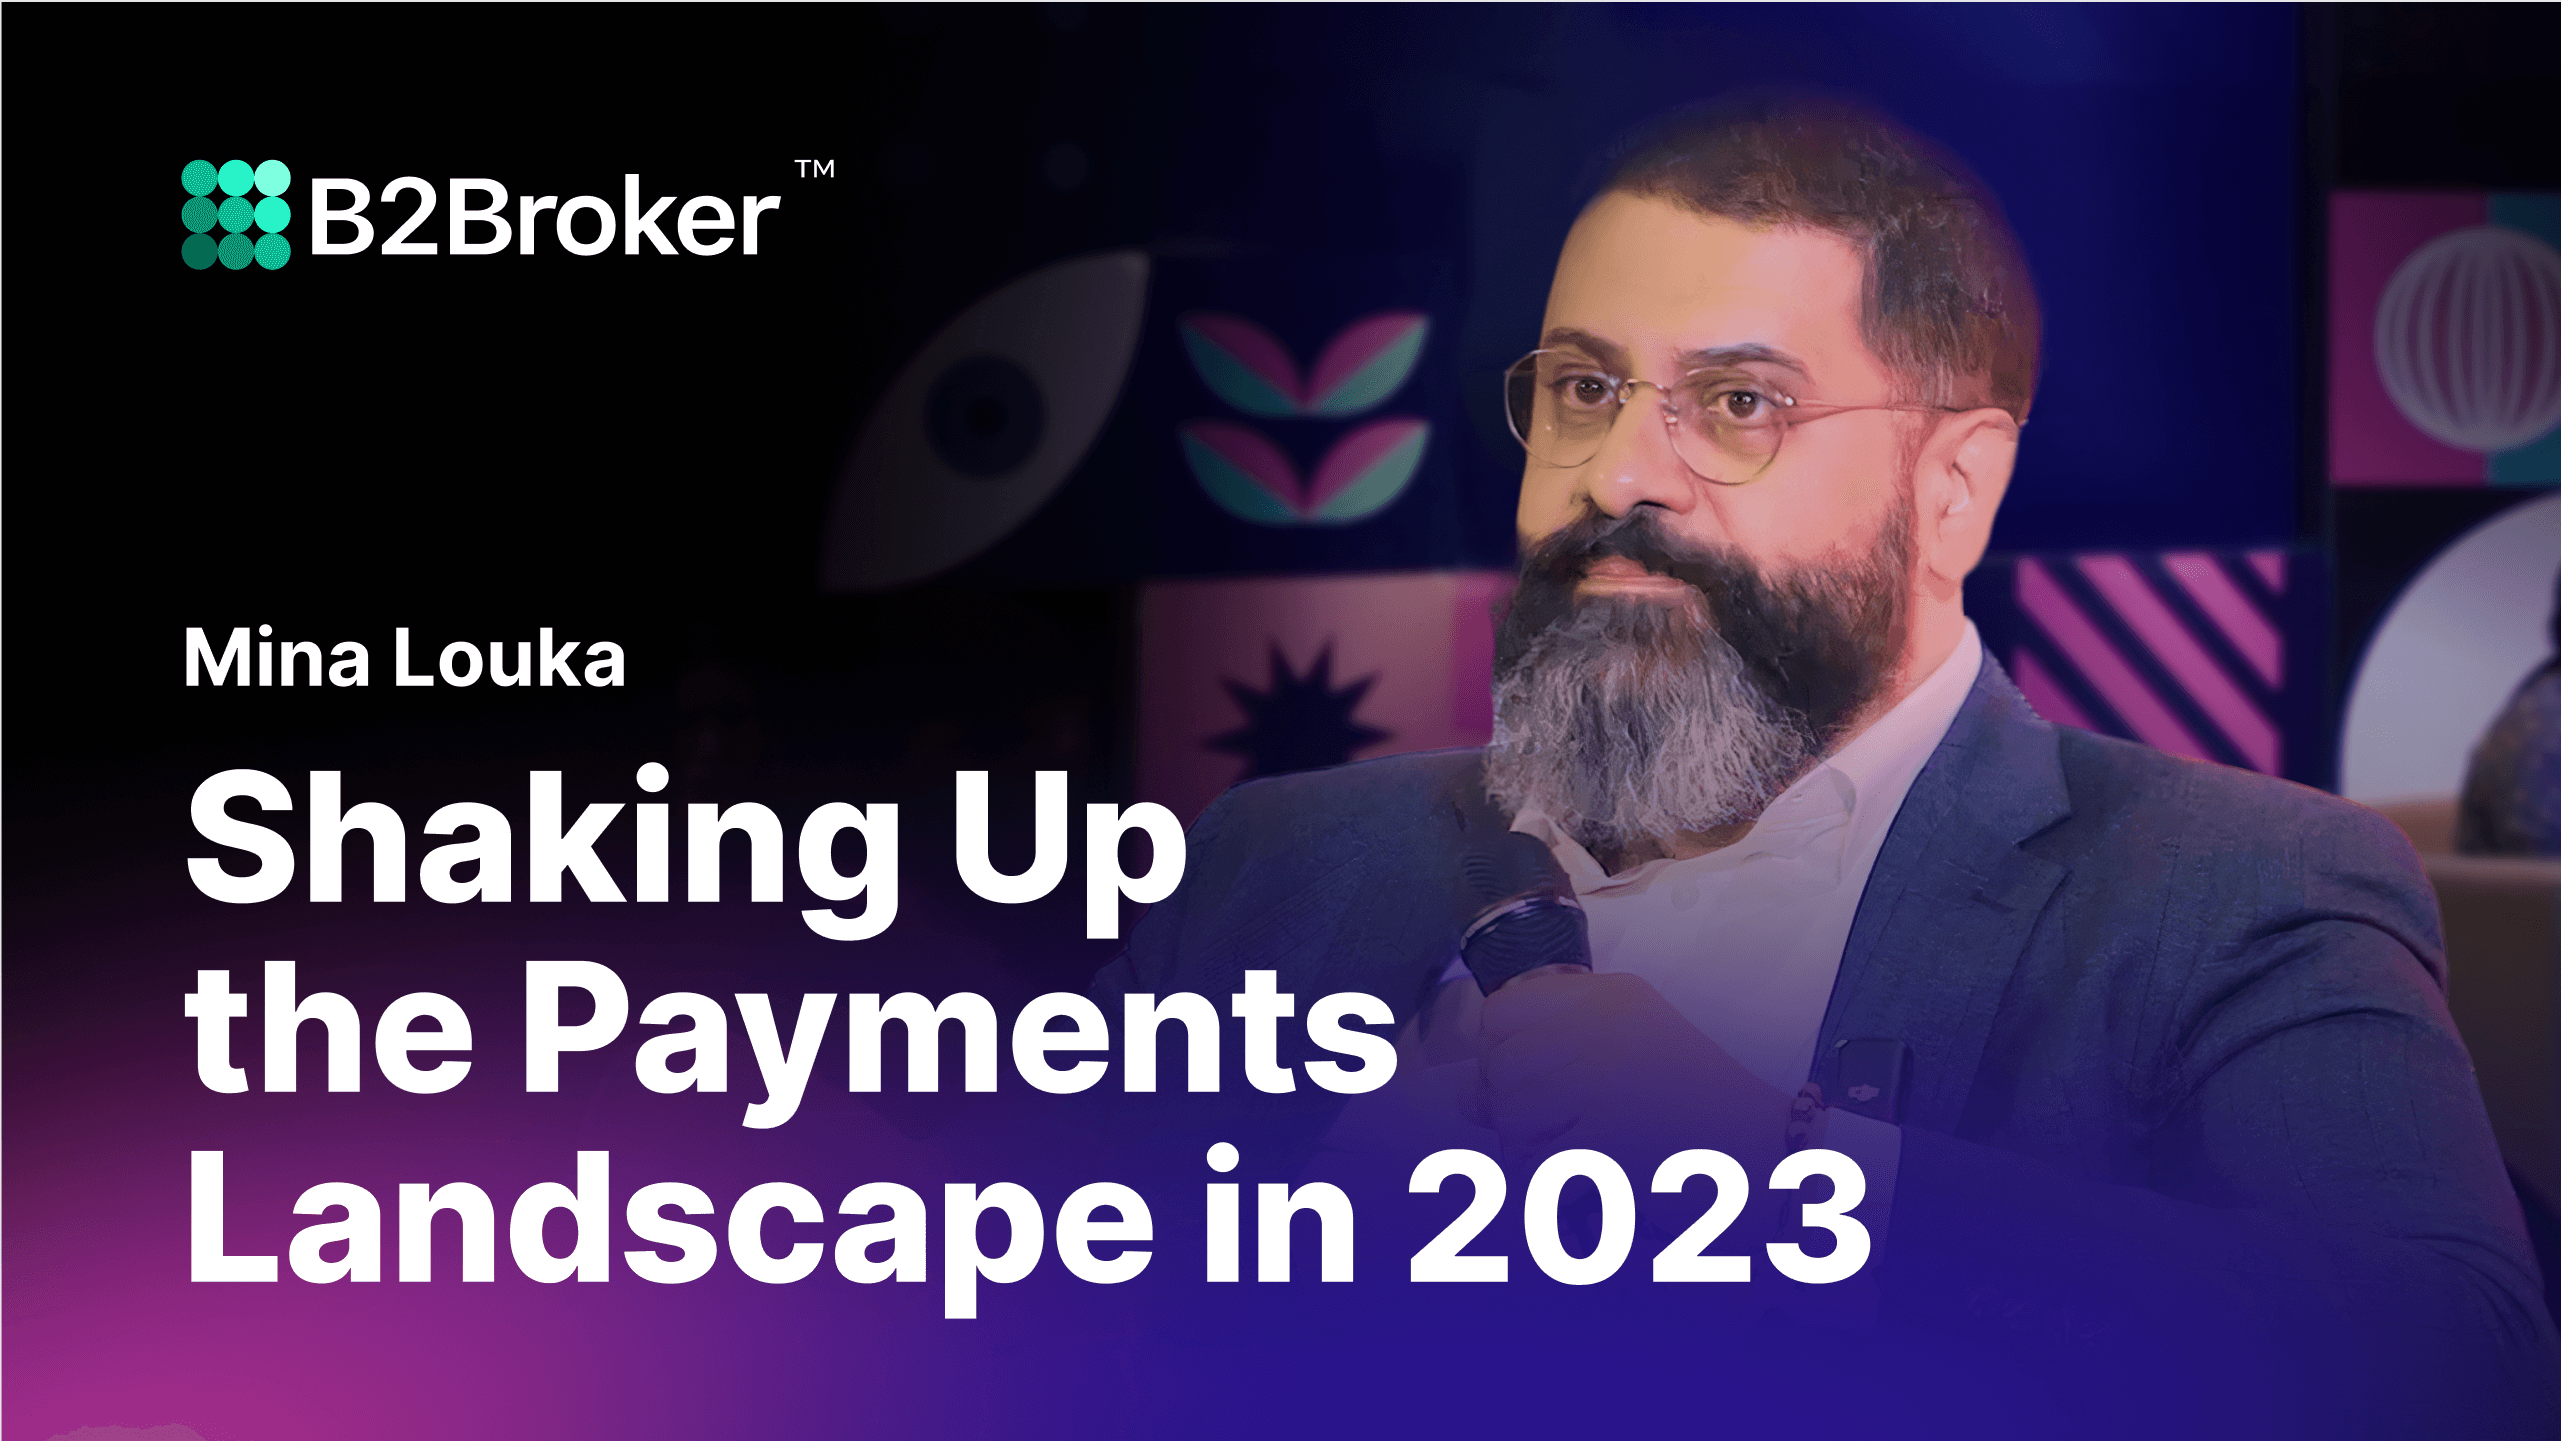 iFX Expo Asia 2023 | Shaking Up the Payments Landscape in 2023